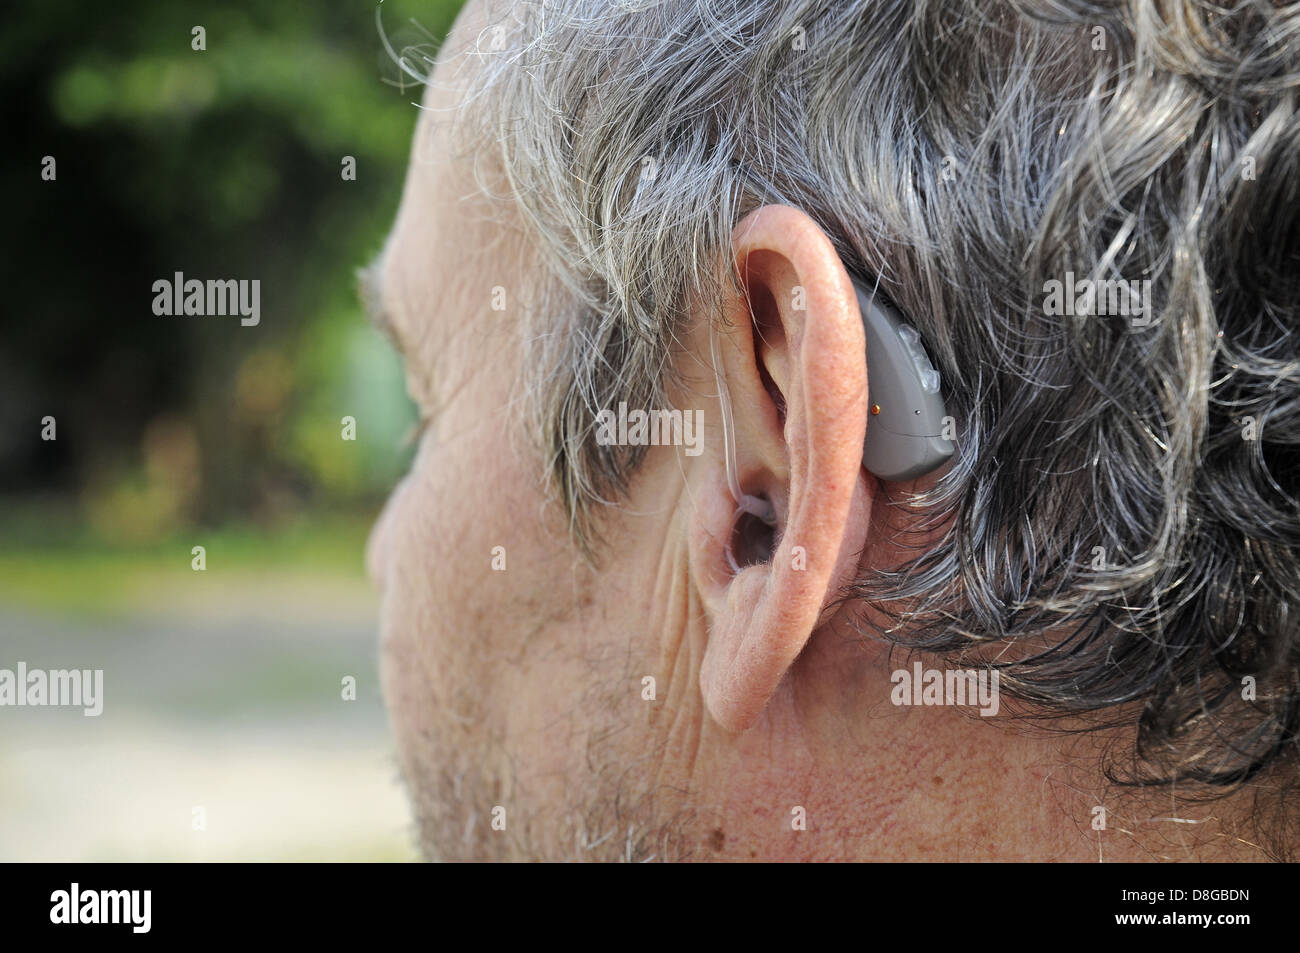 Hearing aid behind the ear of a man Stock Photo